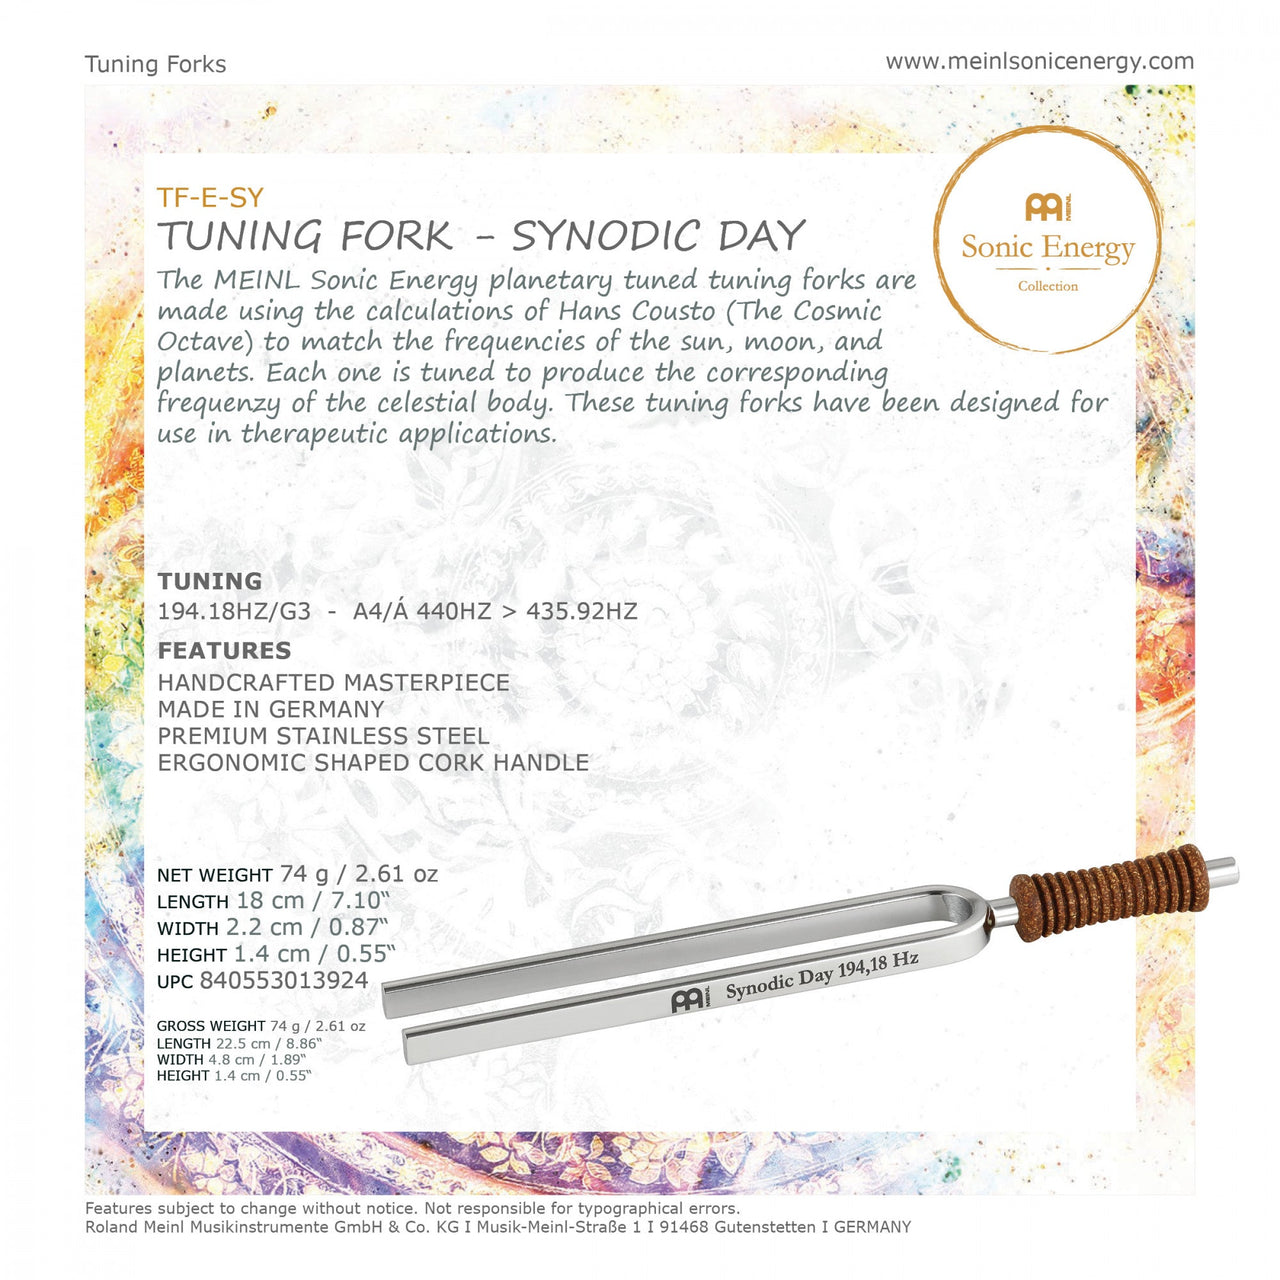 MEINL Sonic Energy Tuning Fork, Synodic Day 194.18 Hz (TF-E-SY) Percussion Meinl 